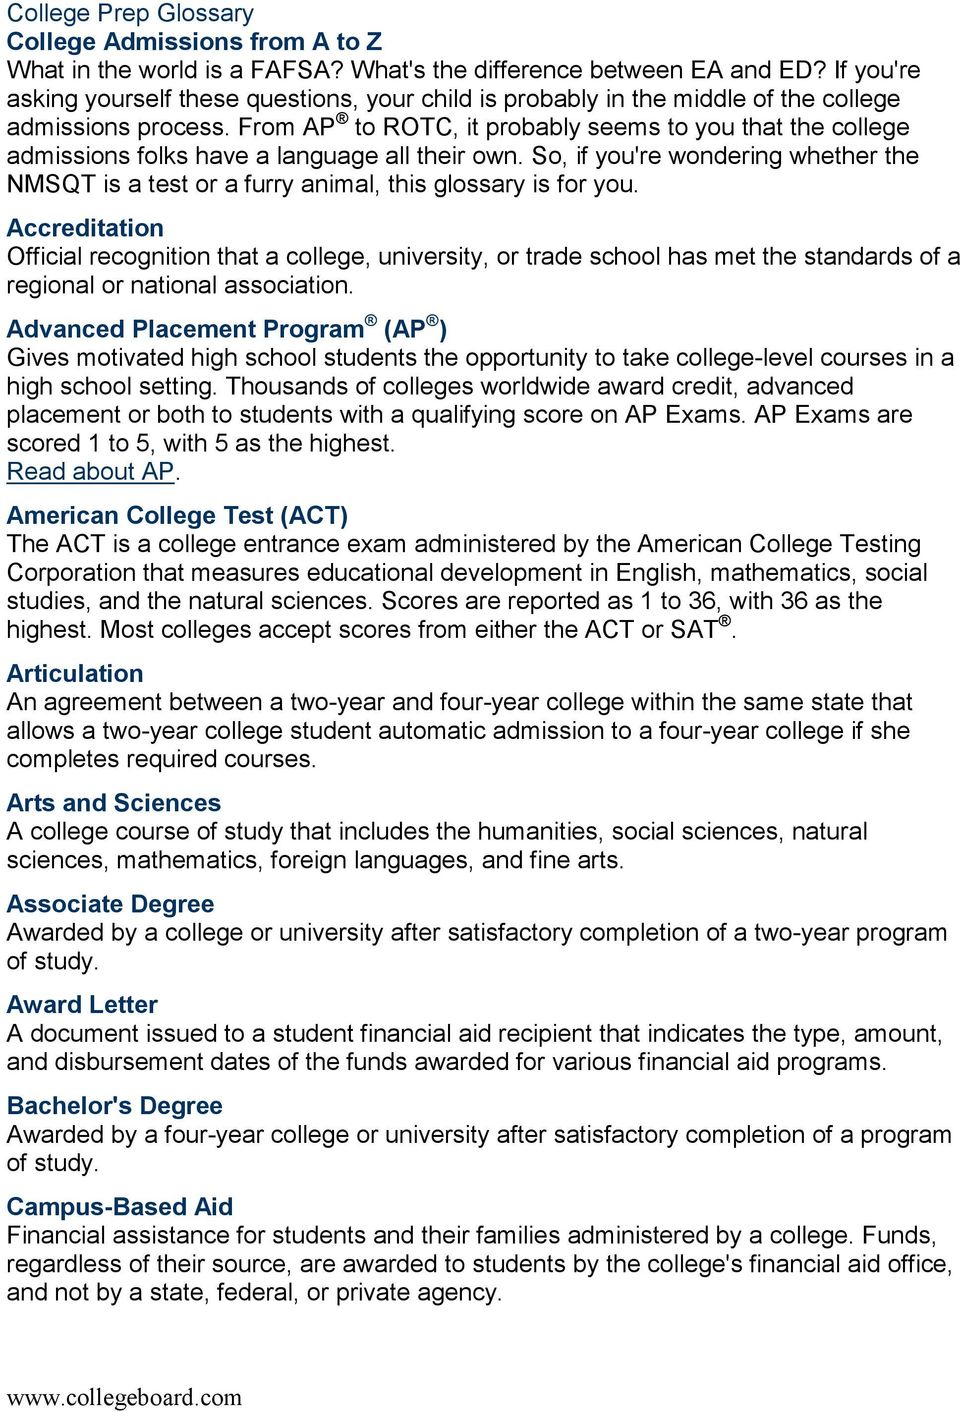 From AP to ROTC, it probably seems to you that the college admissions folks have a language all their own.